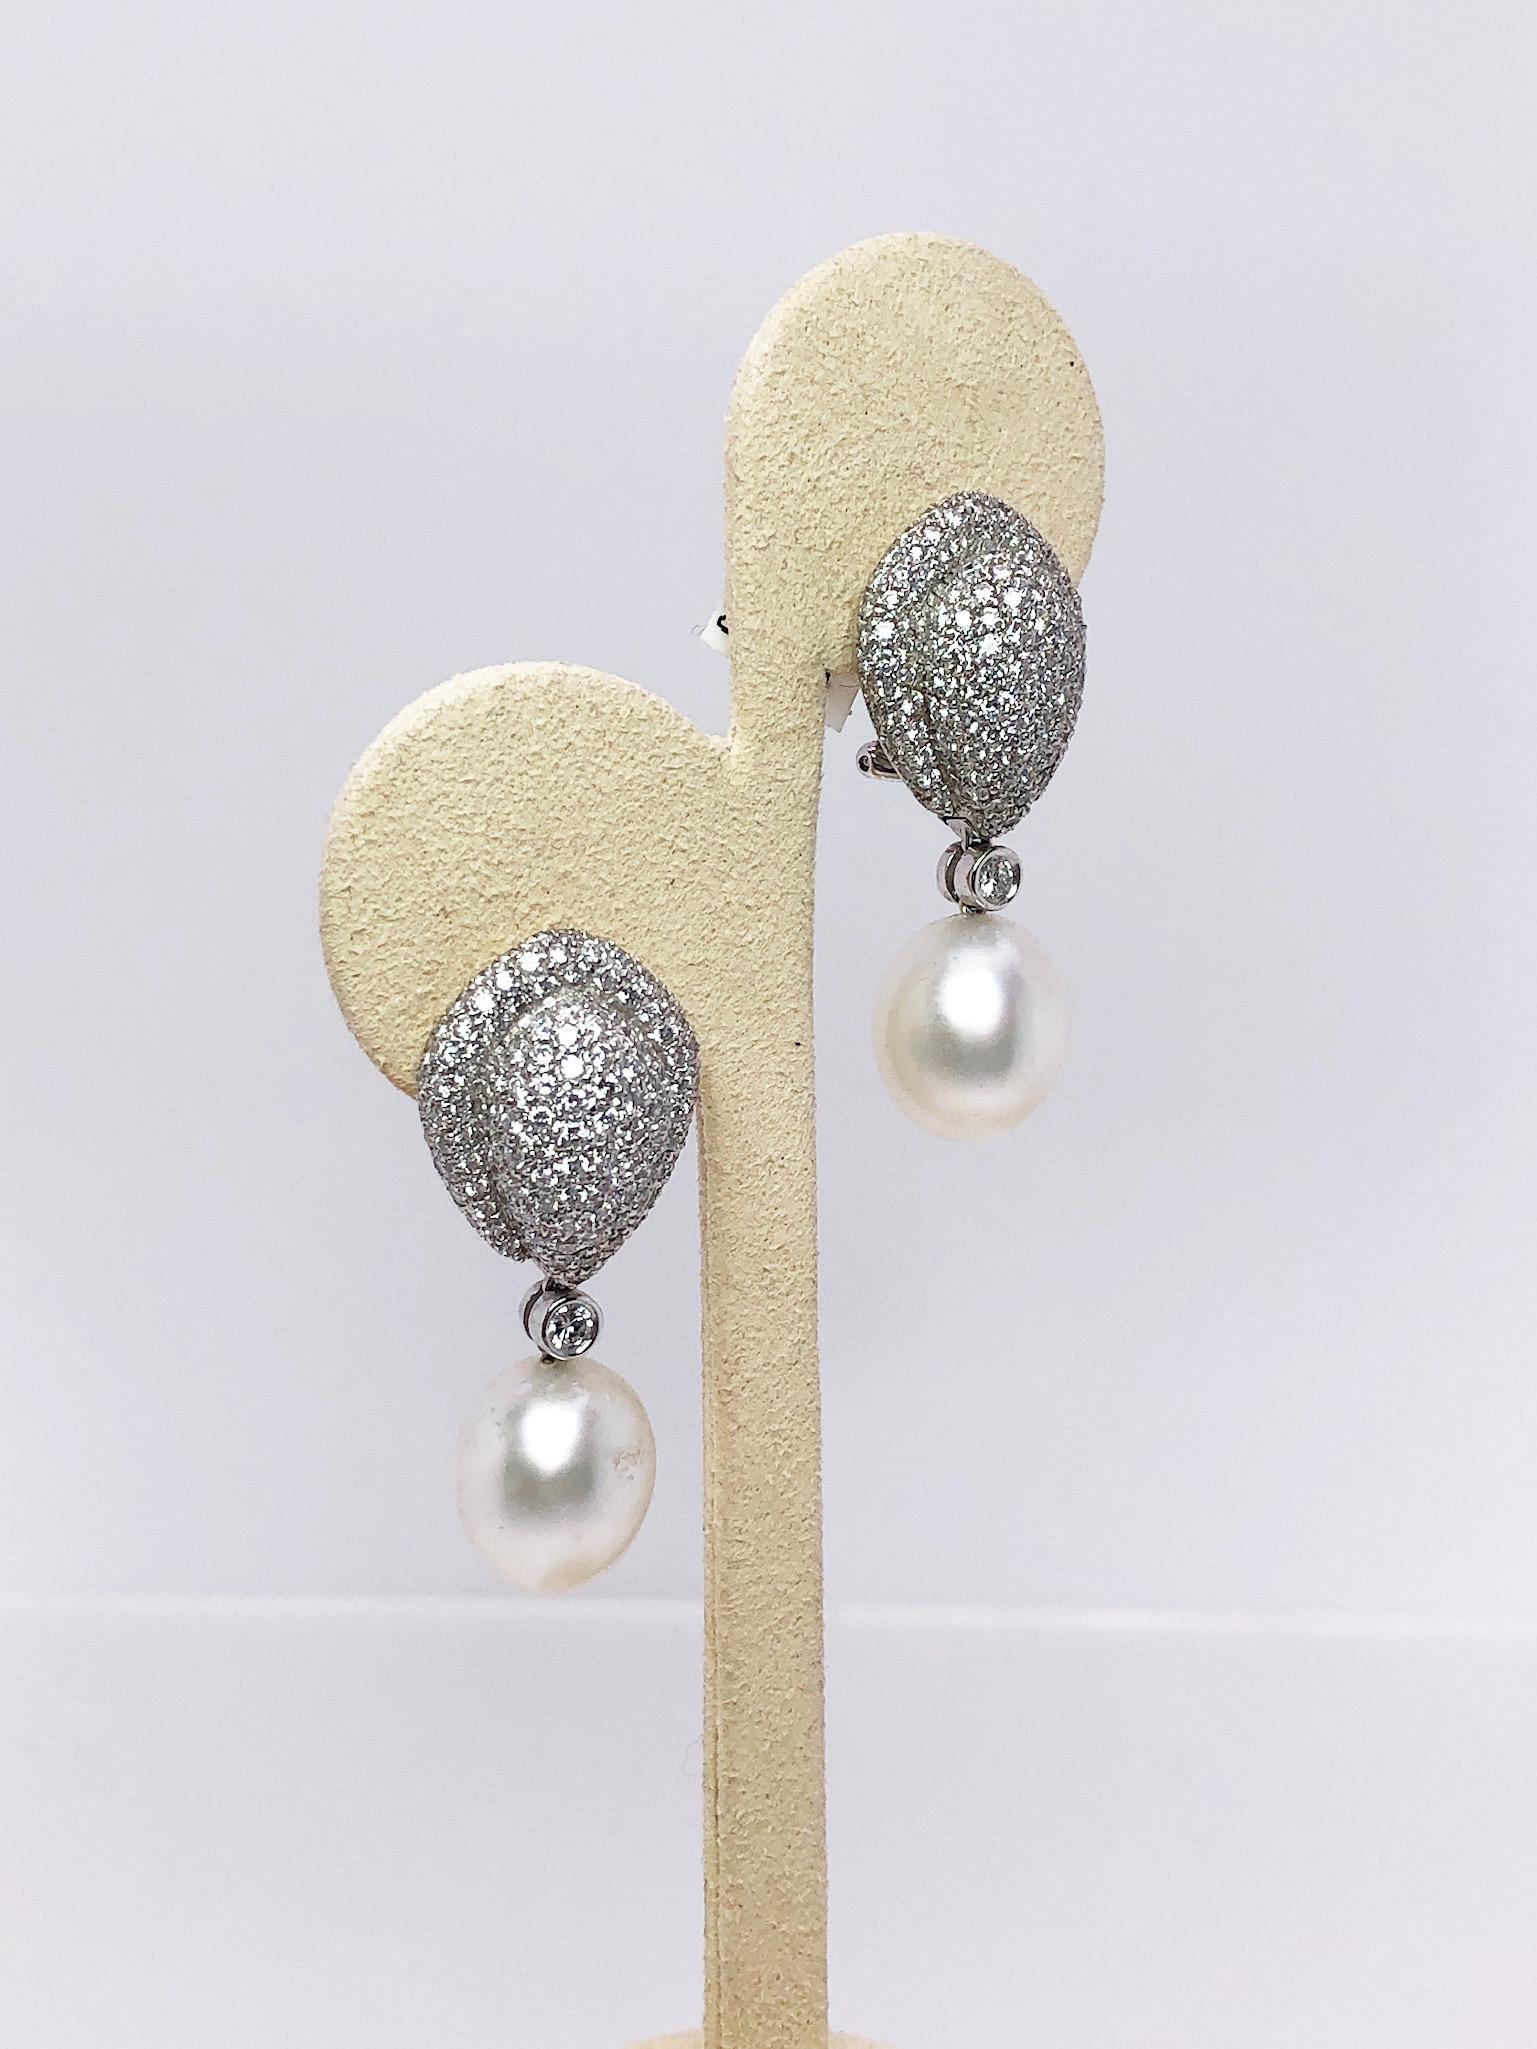 Cellini Jewelers NYC 18KT White Gold earrings, are composed of 3.91 carats of diamonds and 14.5mm X 12mm South Sea Pearls. Approximately 300 round diamonds make up the beautiful bombe design. 
Earrings measure approximately 1.5